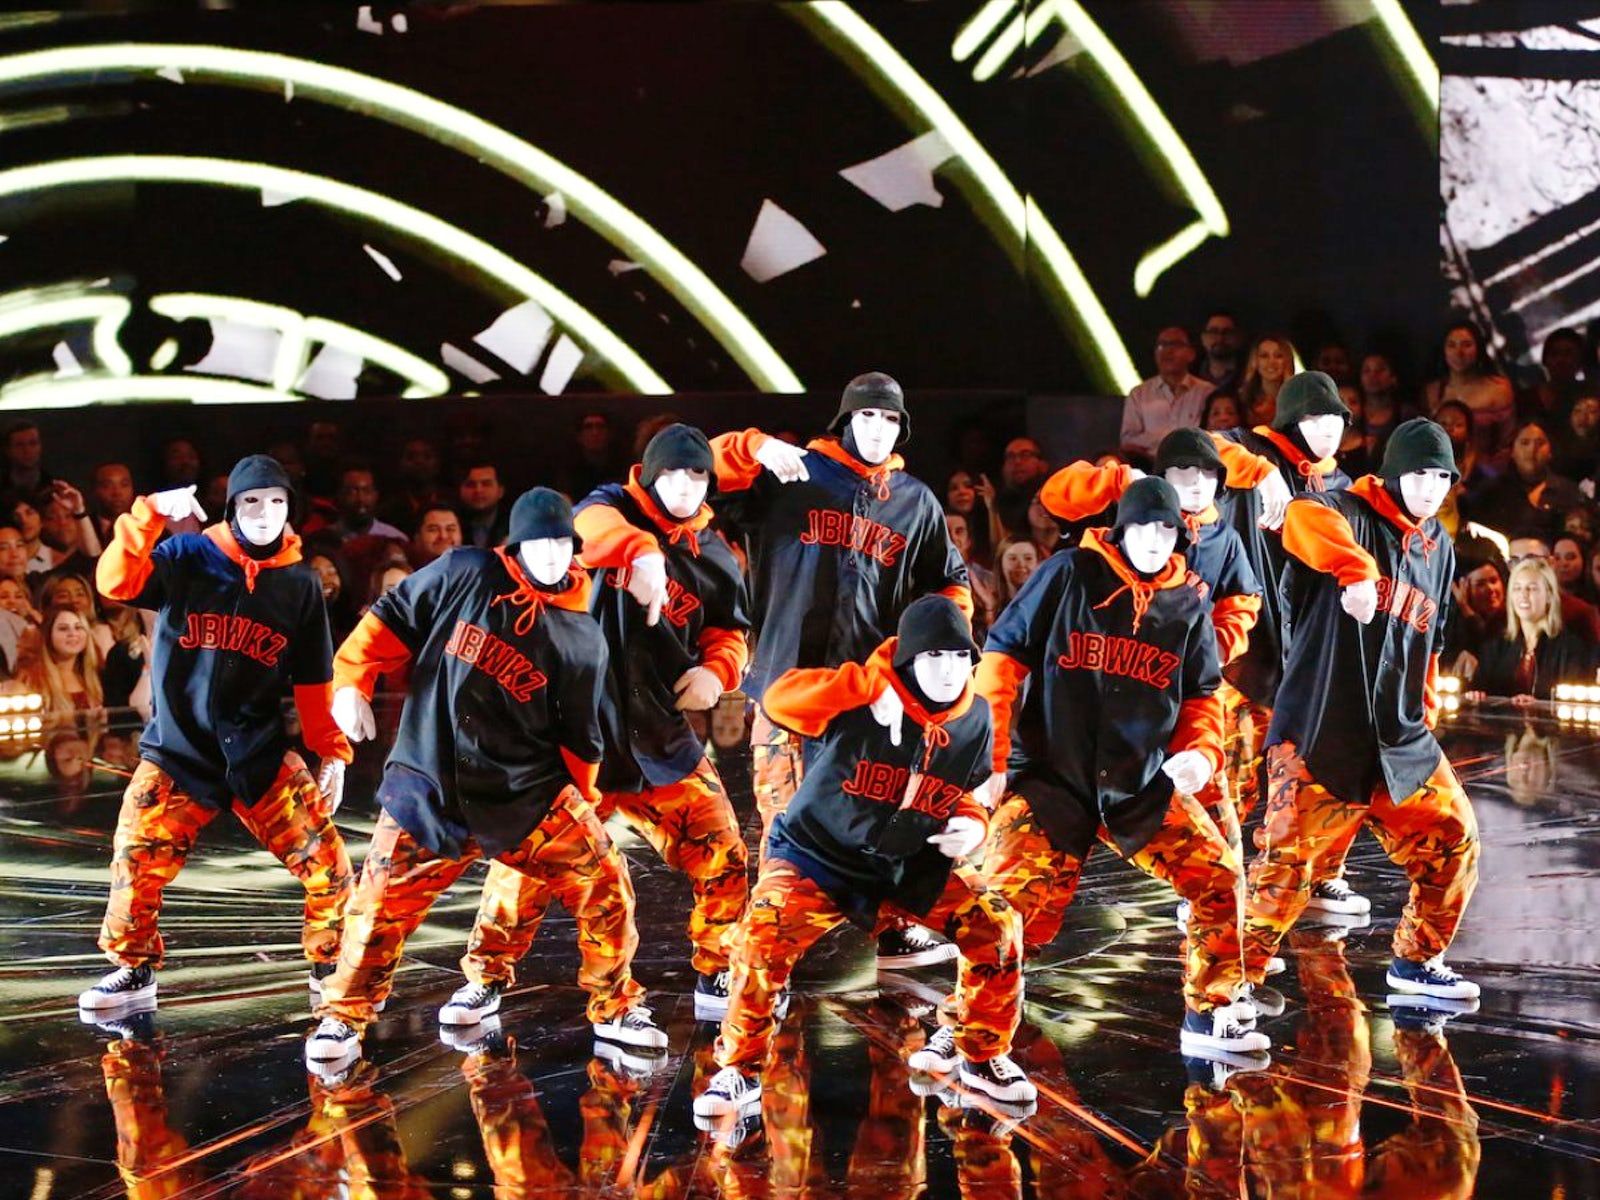 1600x1200 World Of Dance Wraps The Duels With 7 Acts Advancing Jabbawockeez Shockingly Ousted